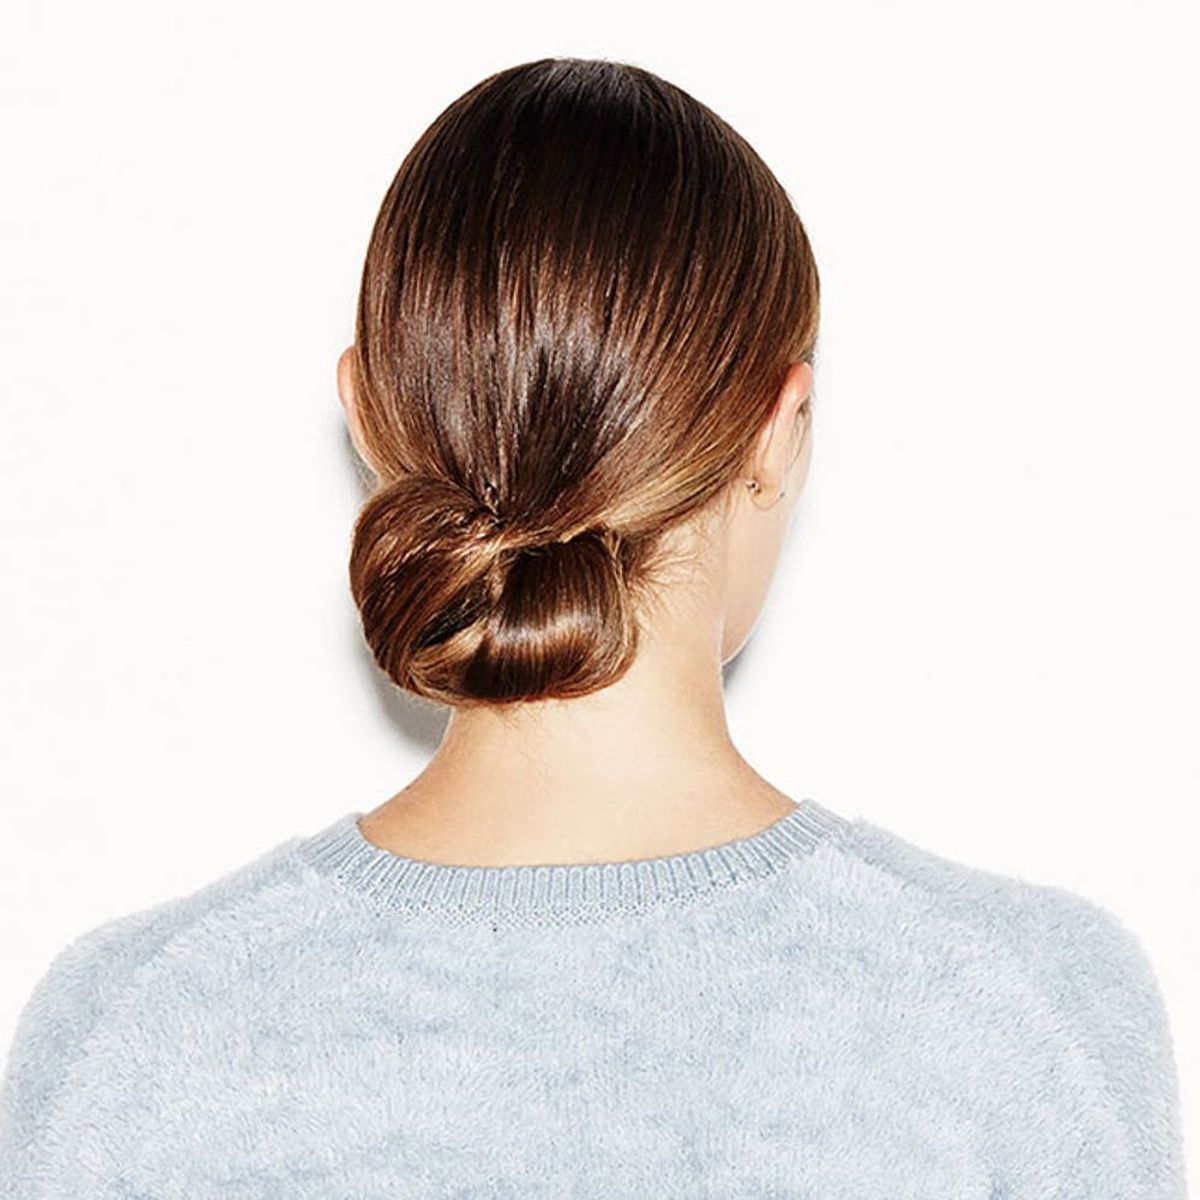 Need a New Fancy ‘Do? Try One of These 9 Low Updos